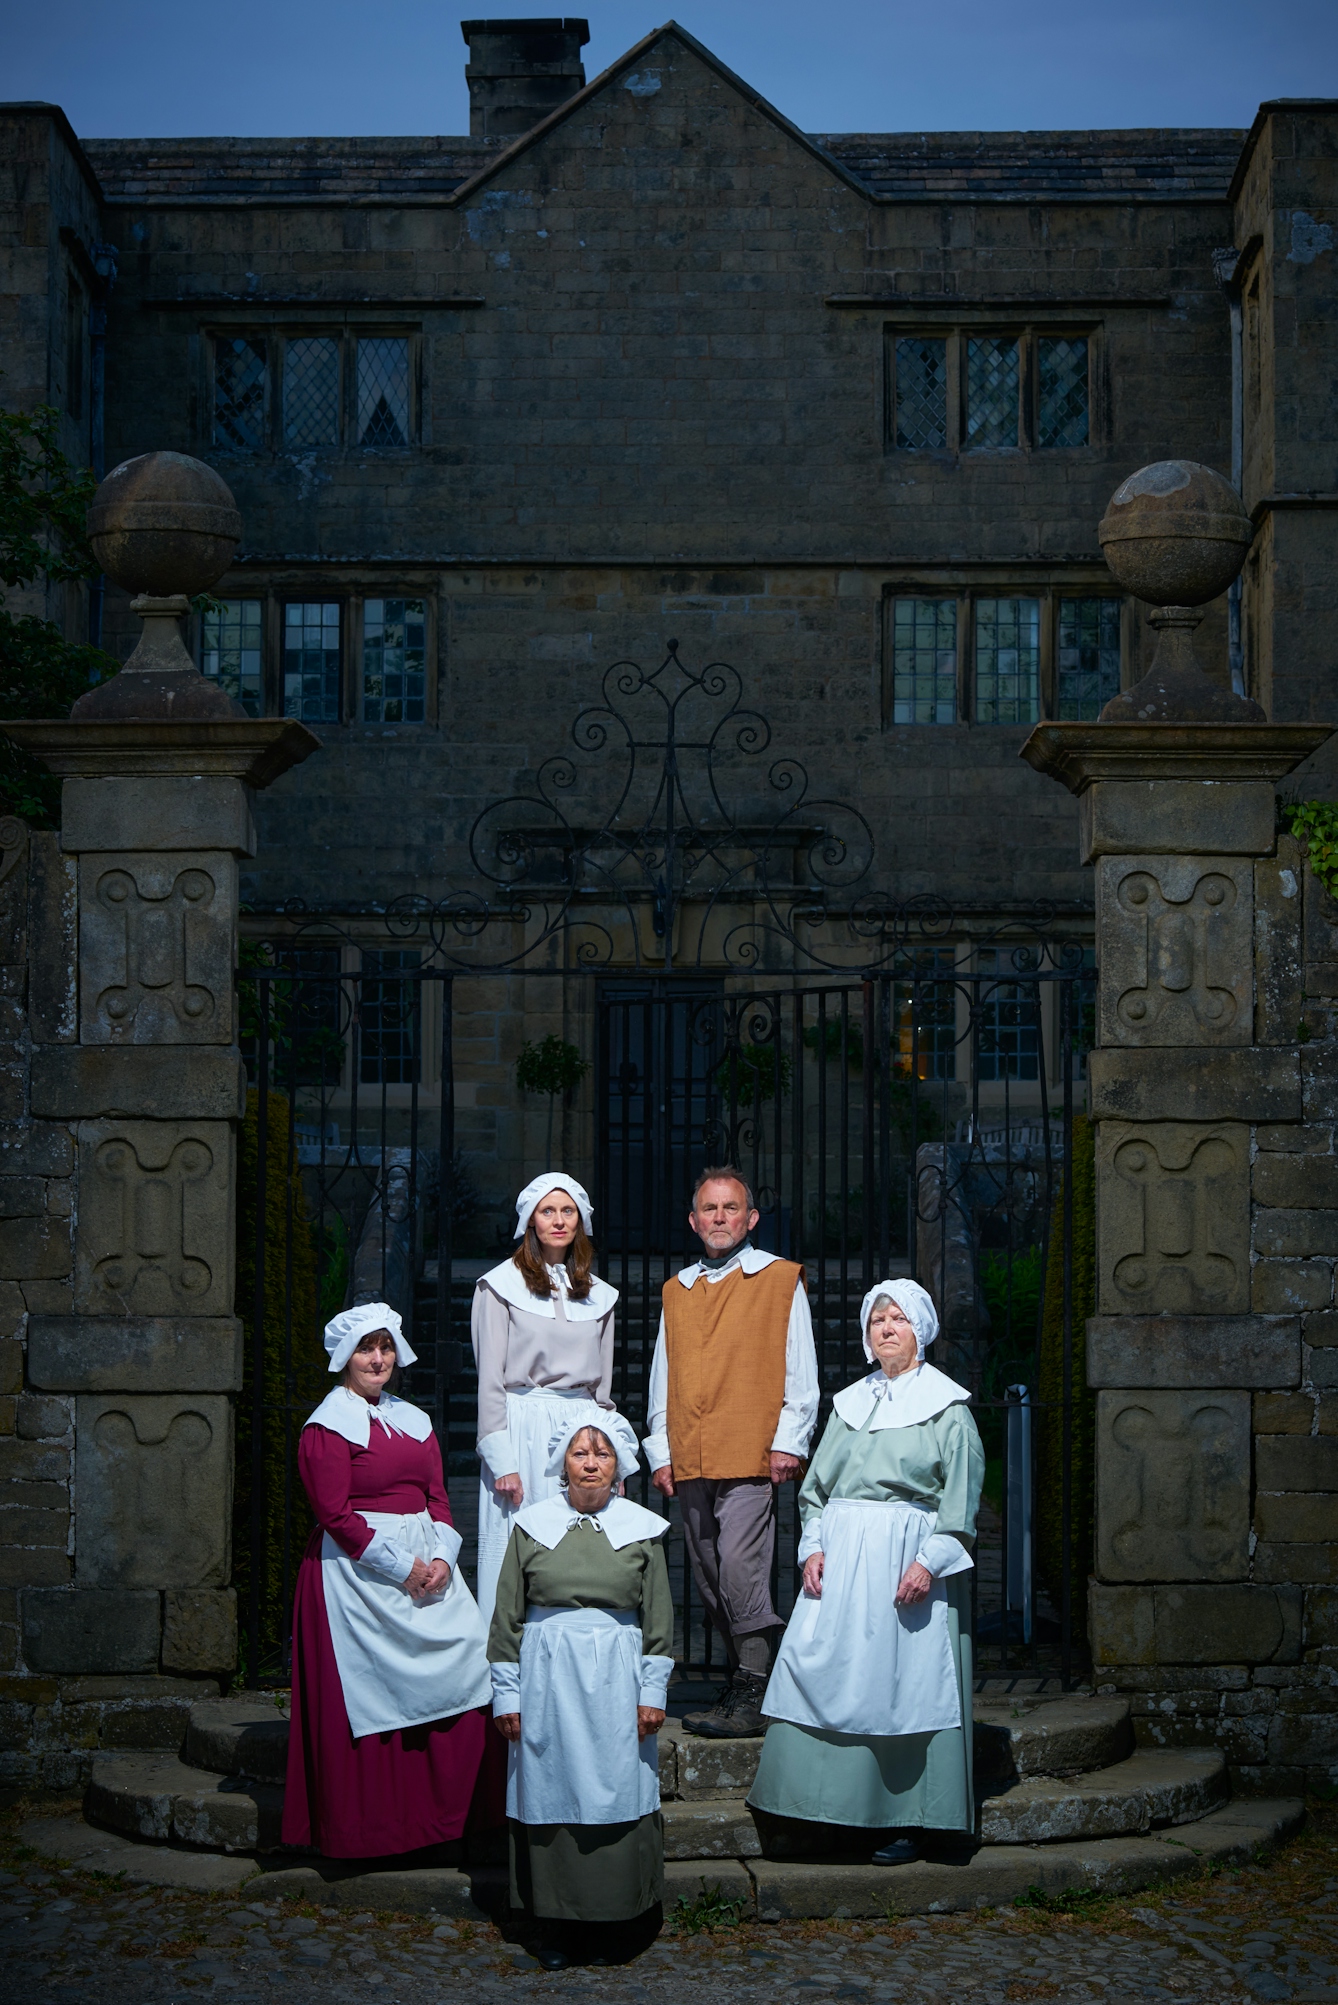 Photograph shot at dusk of the entrance to a stately home or hall. In a pool of light in the foreground is a group of 4 women and 1 man dressed in traditional 17 century clothes, looking towards the camera.